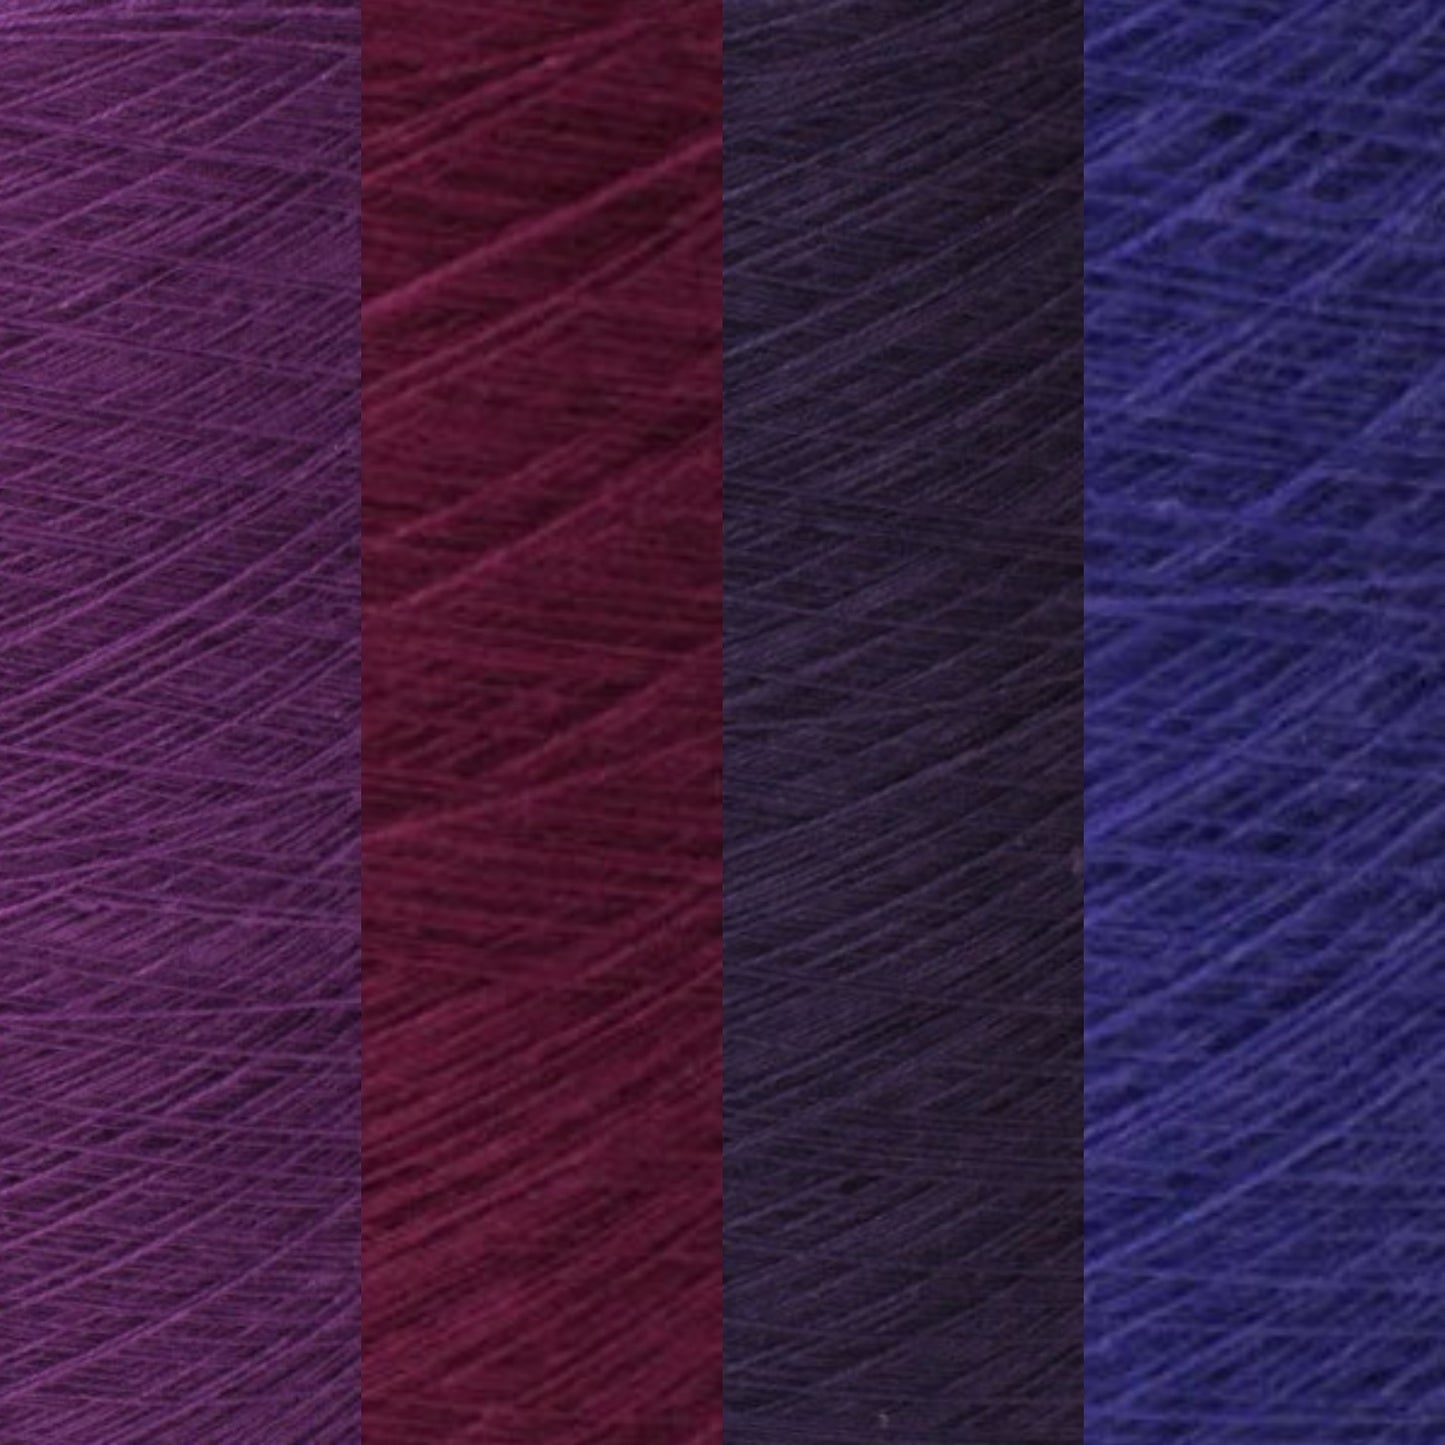 C322 cotton/acrylic ombre yarn cake, normal style, 200g, about 1000m, 3ply